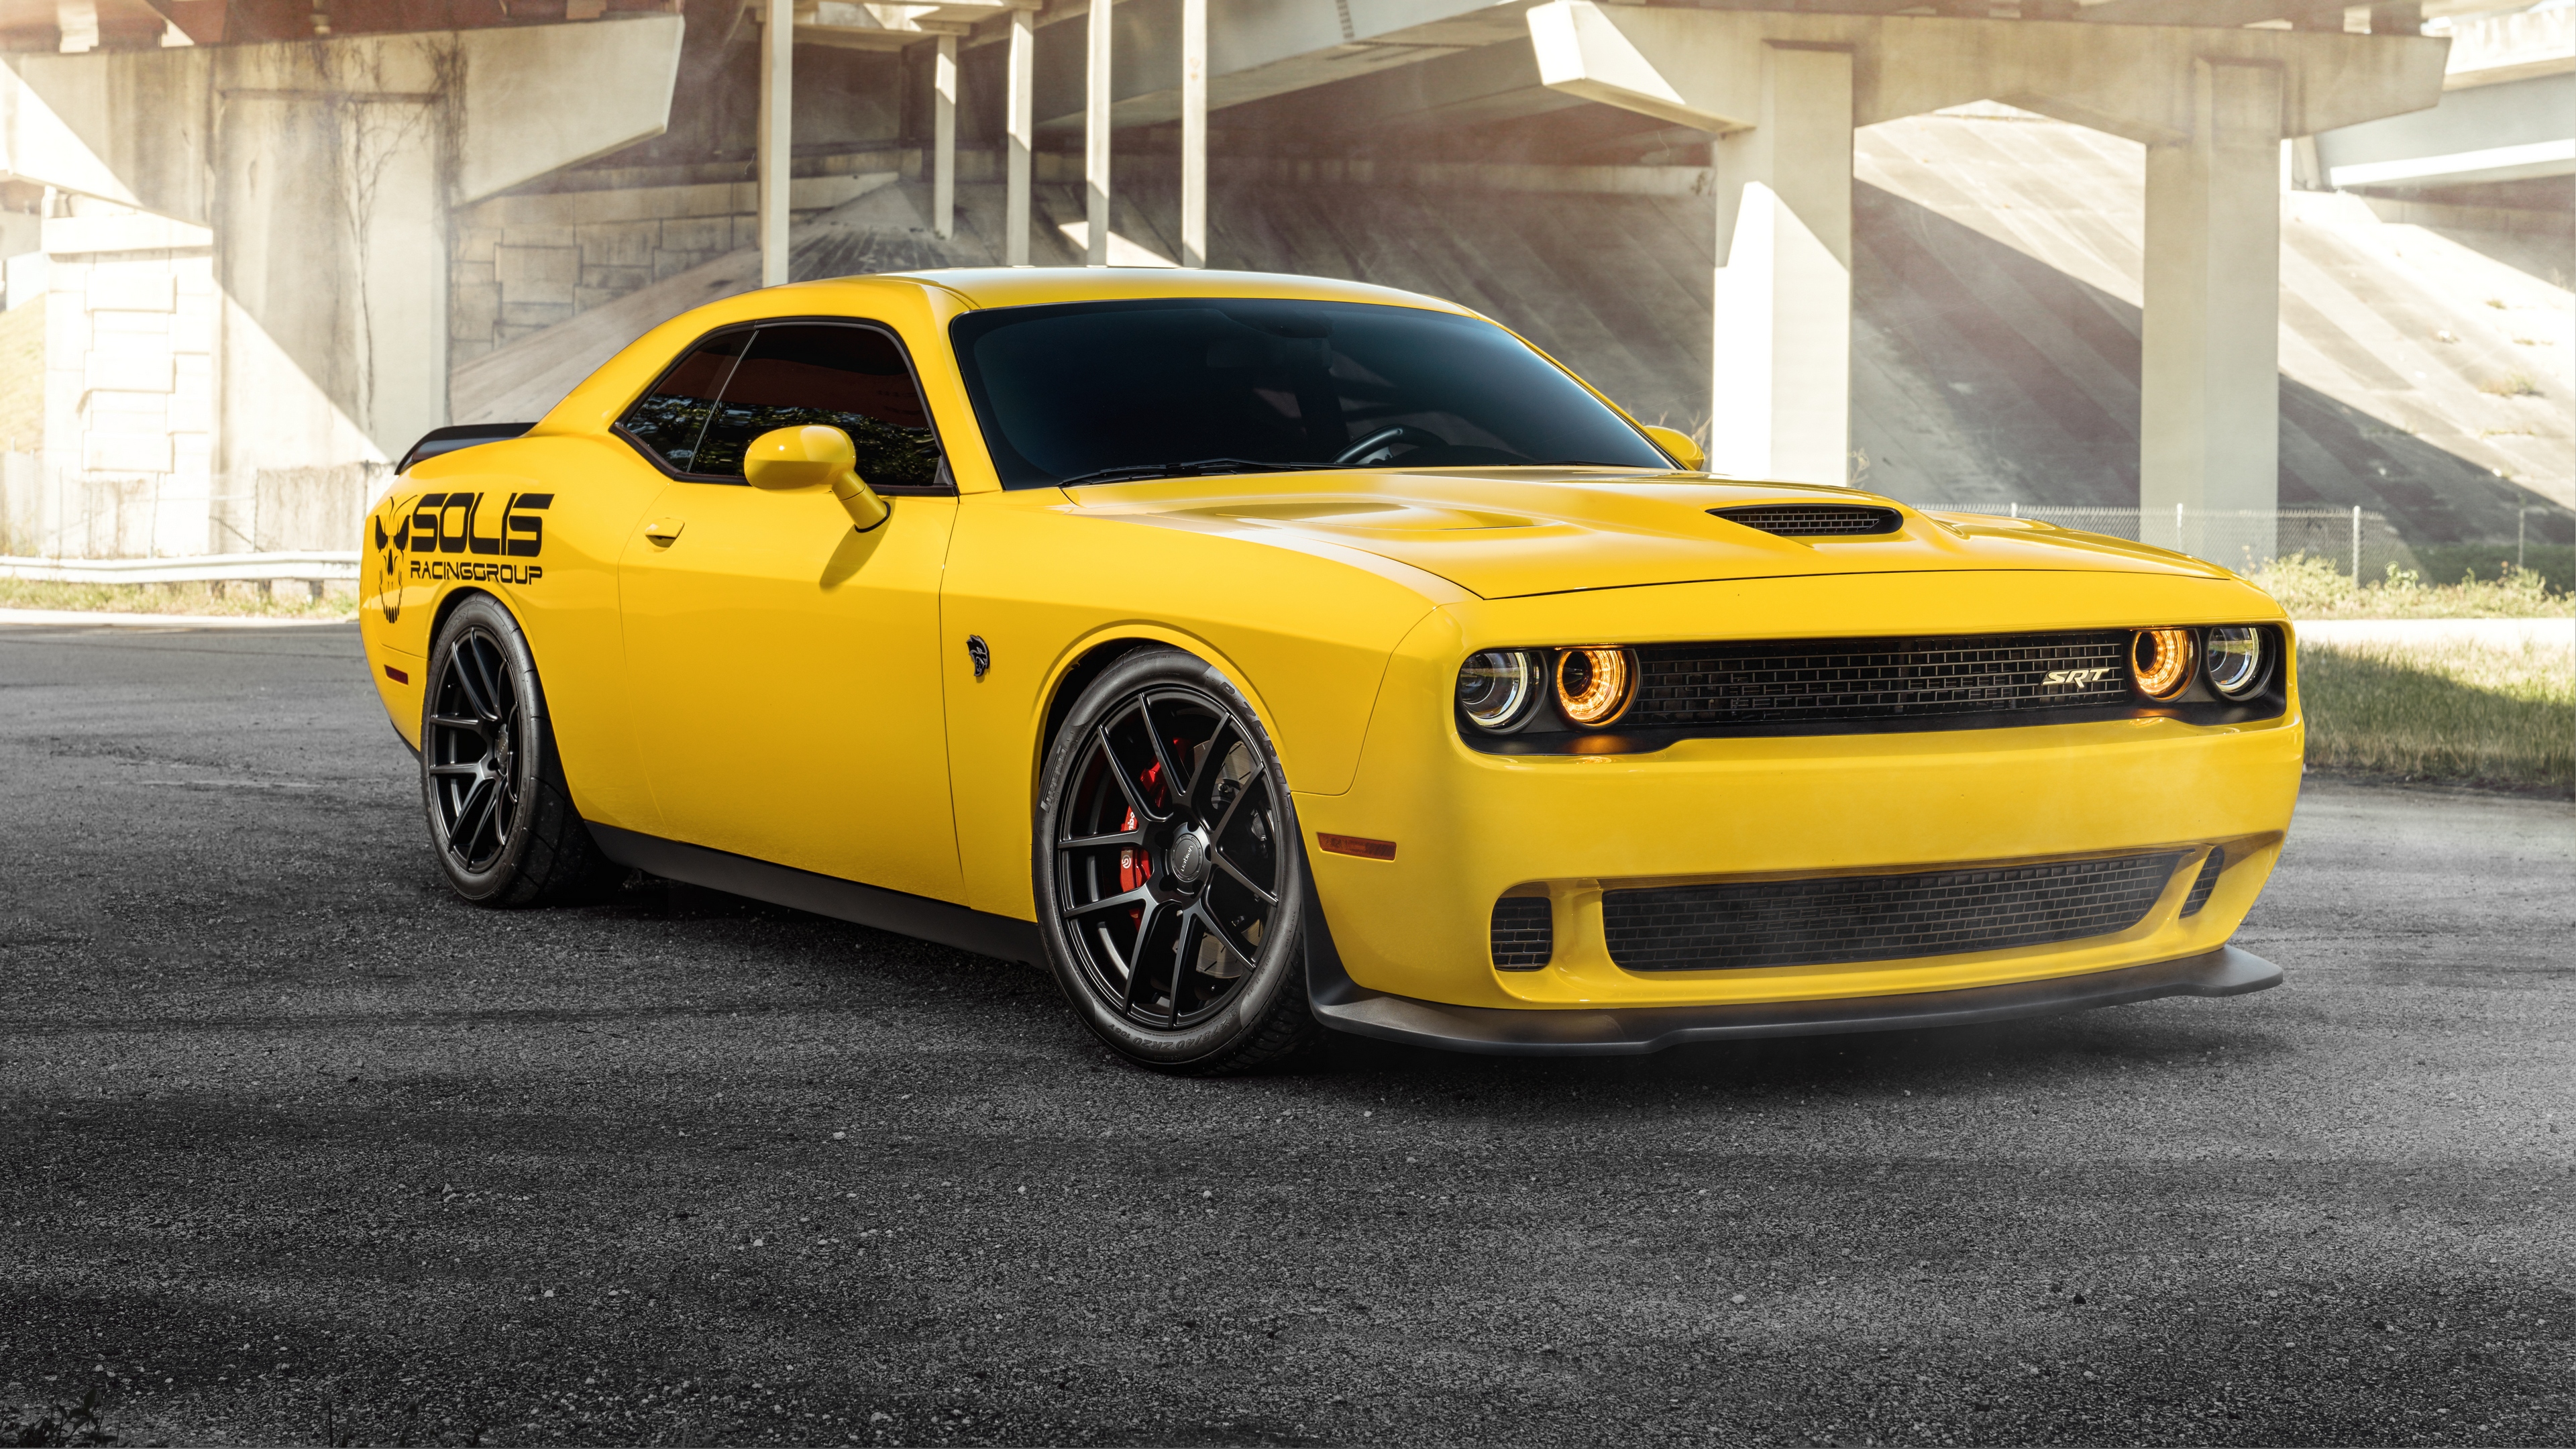 General 3840x2160 Dodge Challenger Dodge vehicle muscle cars car yellow cars American cars Stellantis